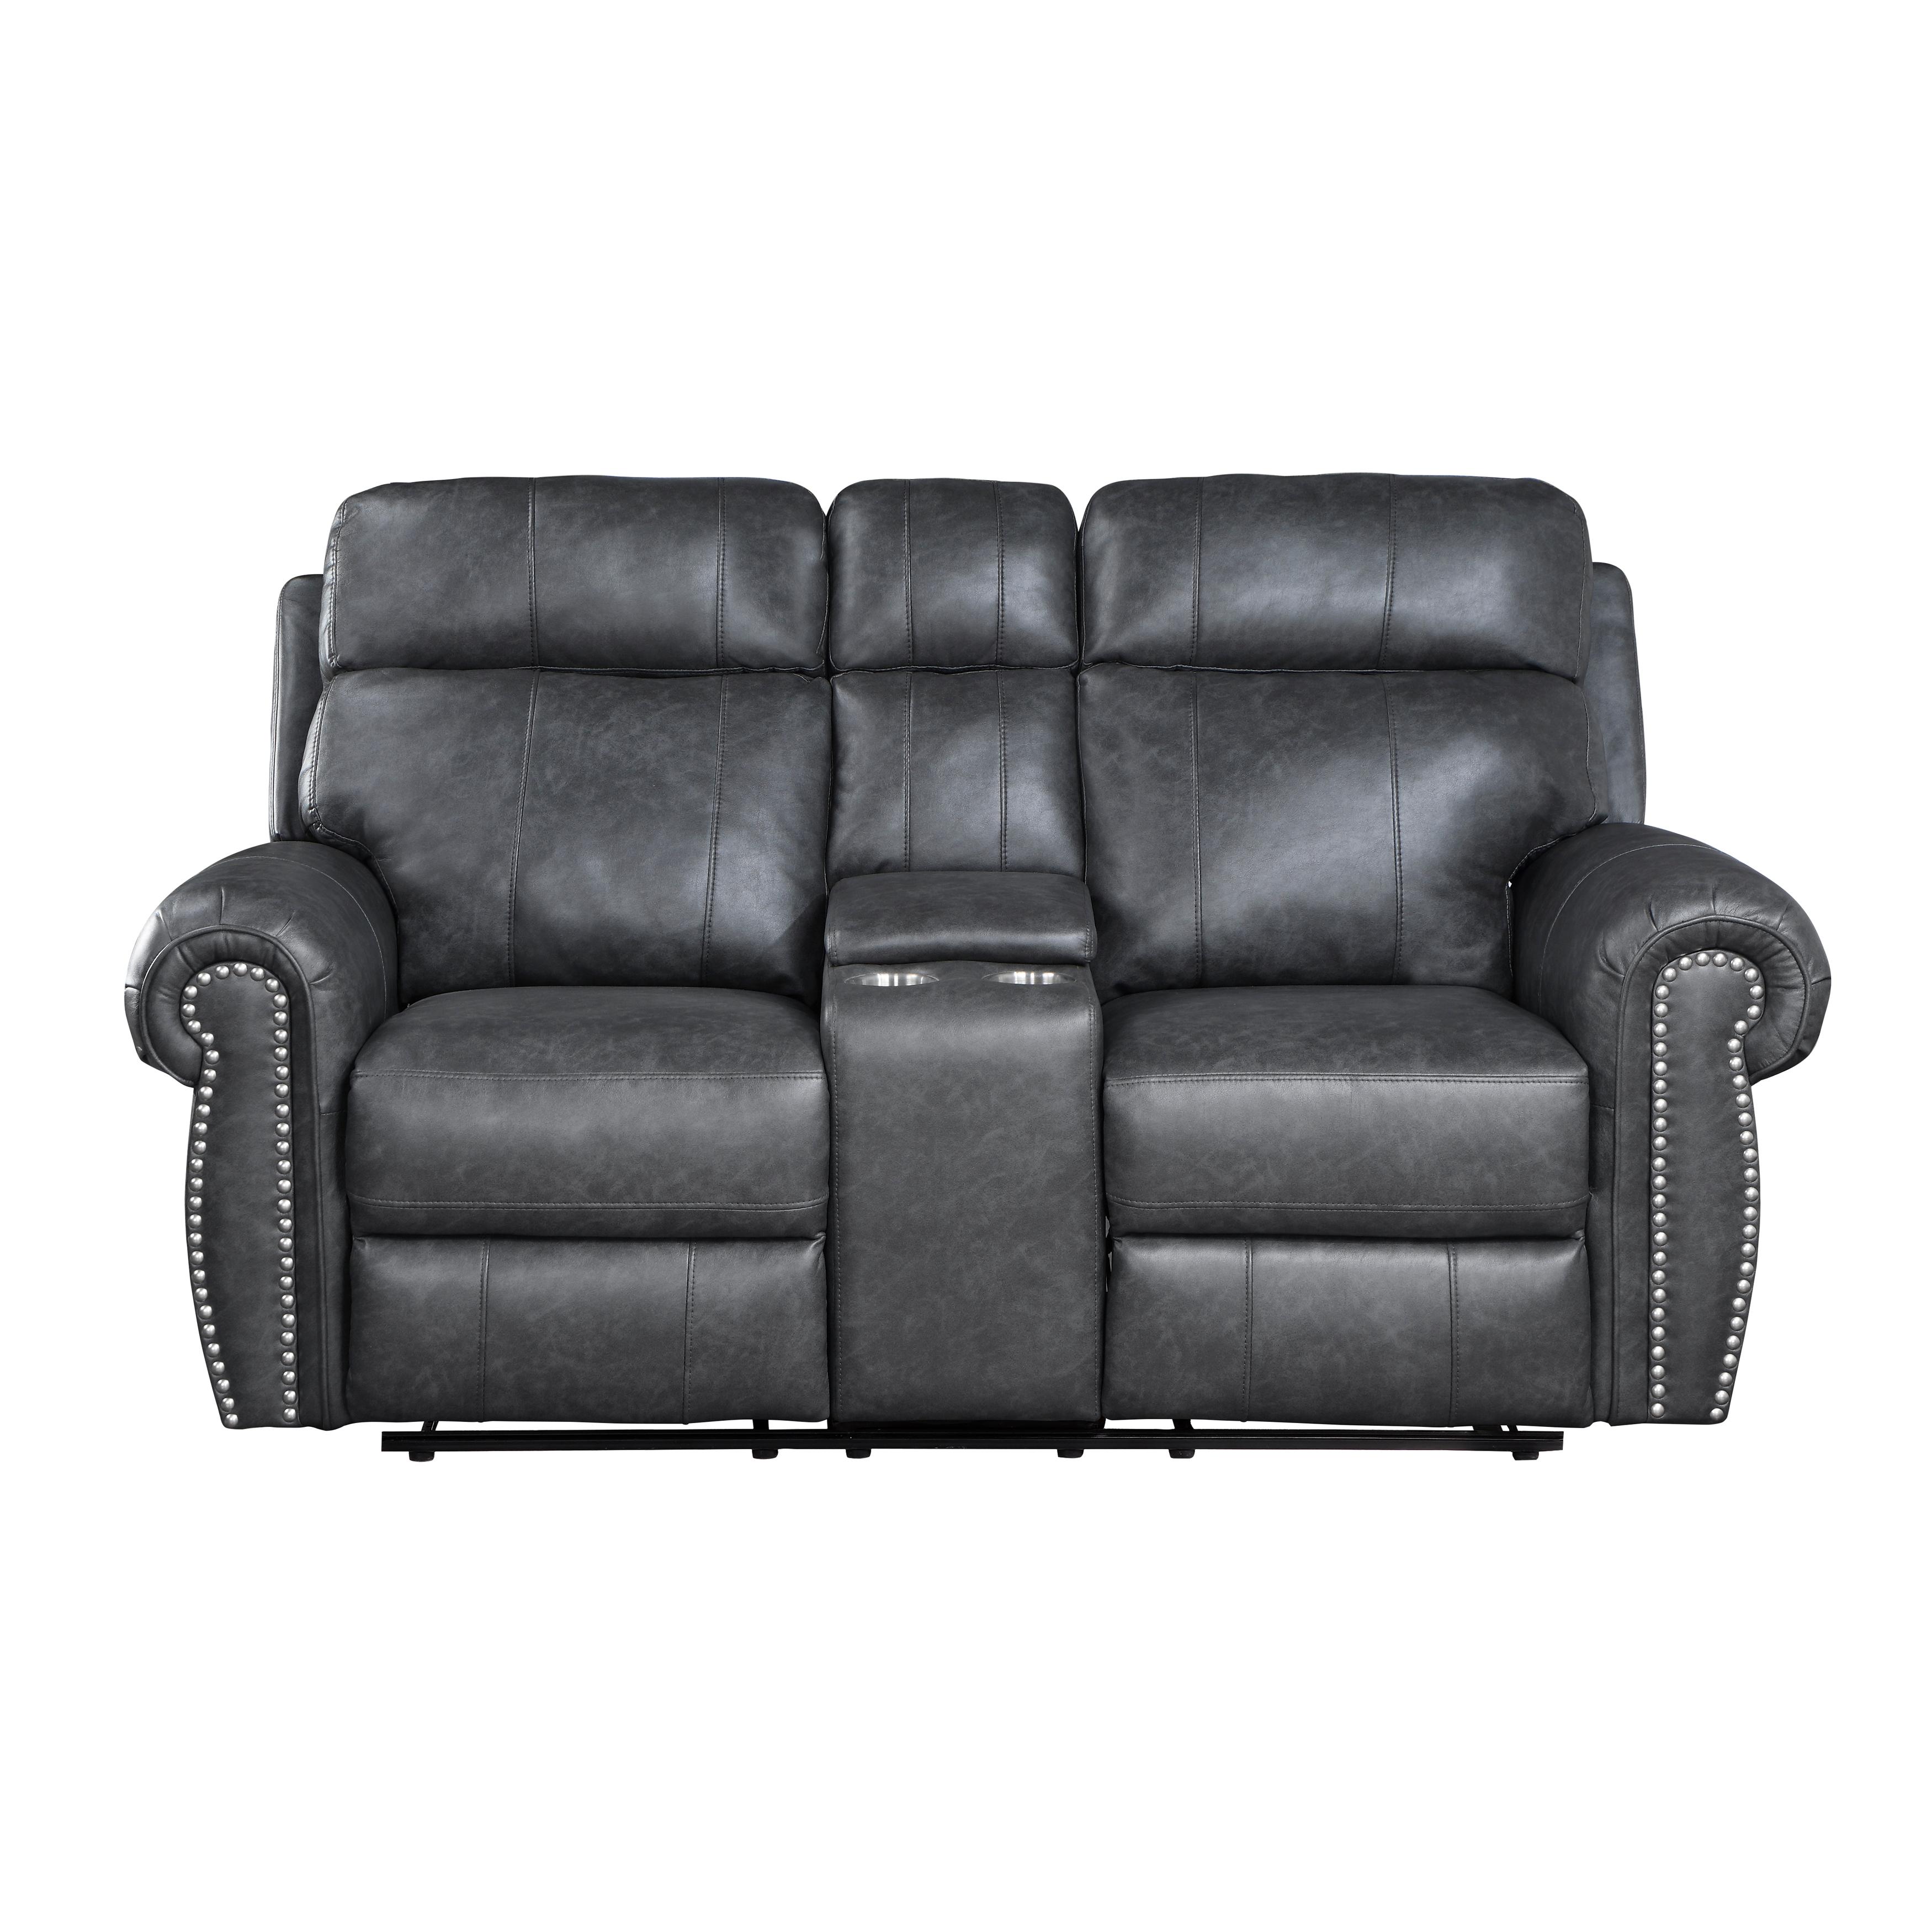 Transitional Reclining Loveseat 9488GY-2 Granville 9488GY-2 in Gray Suede